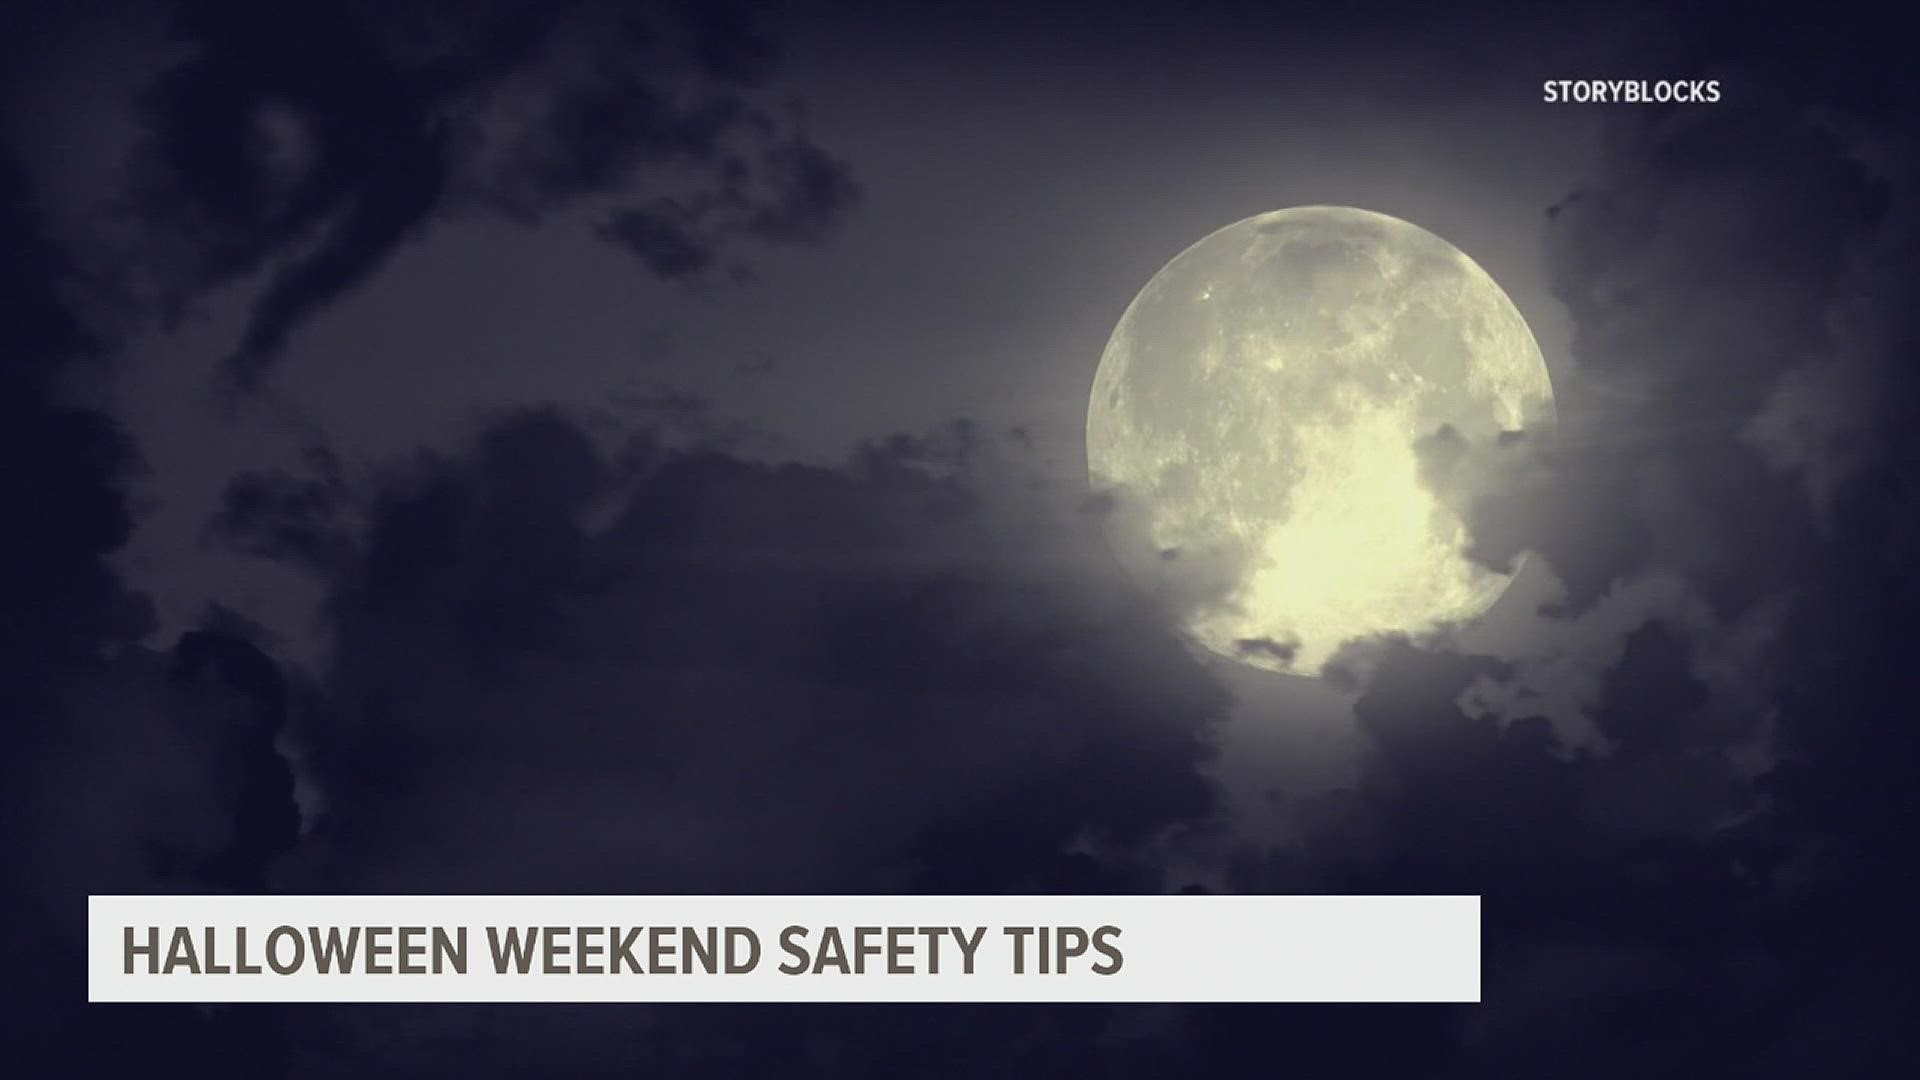 FOX43's Victoria Lucas provides tips on staying safe this holiday!